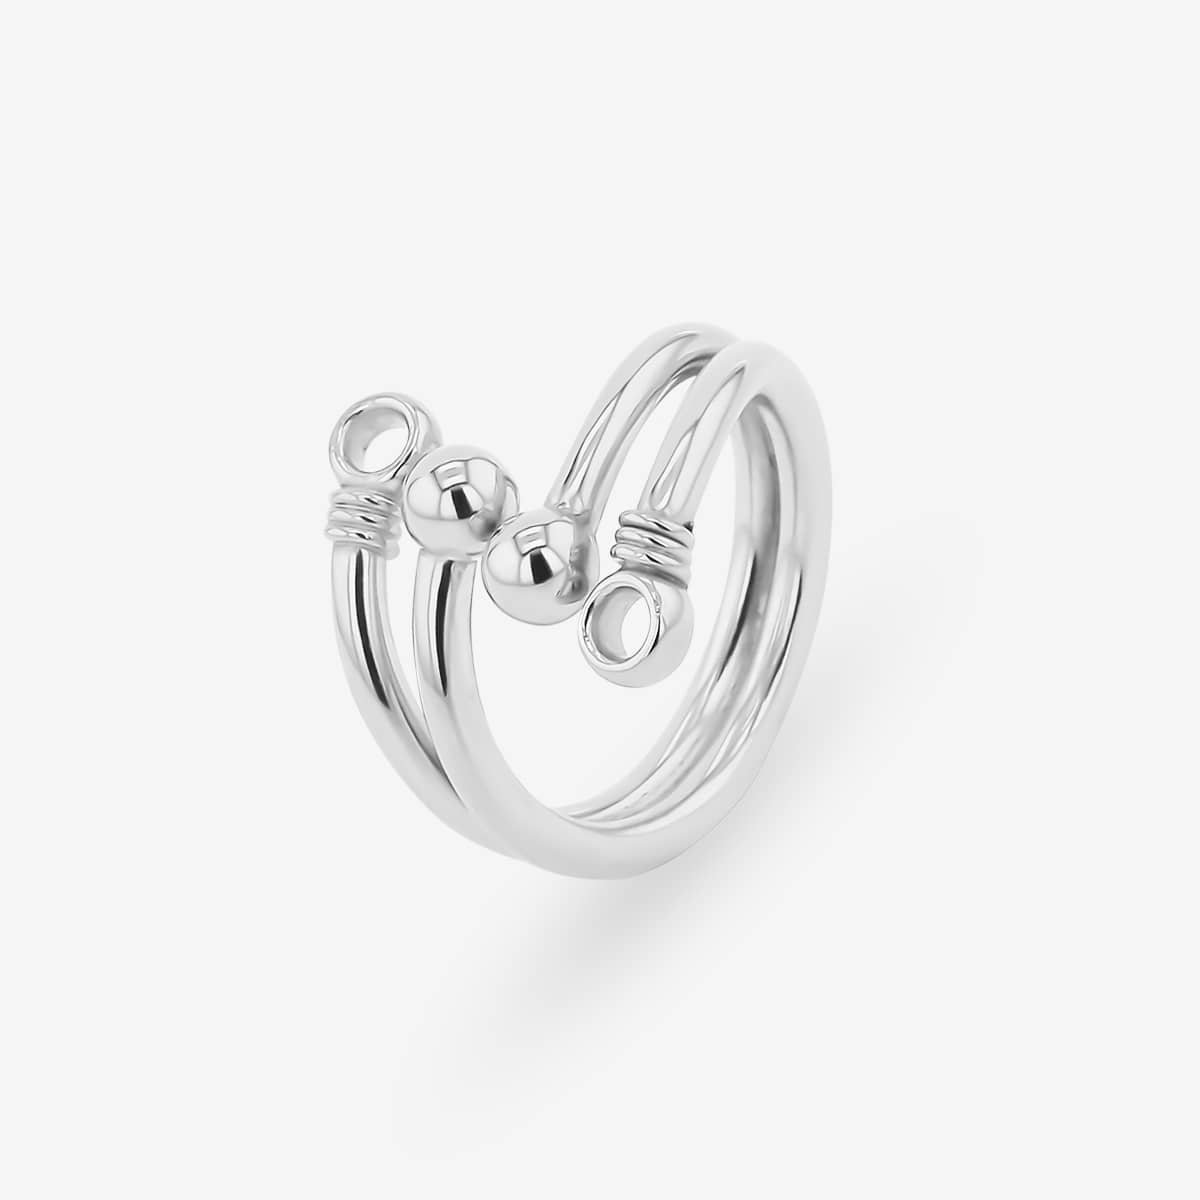 THE CELESTIAL CIRCLE DOUBLE RING